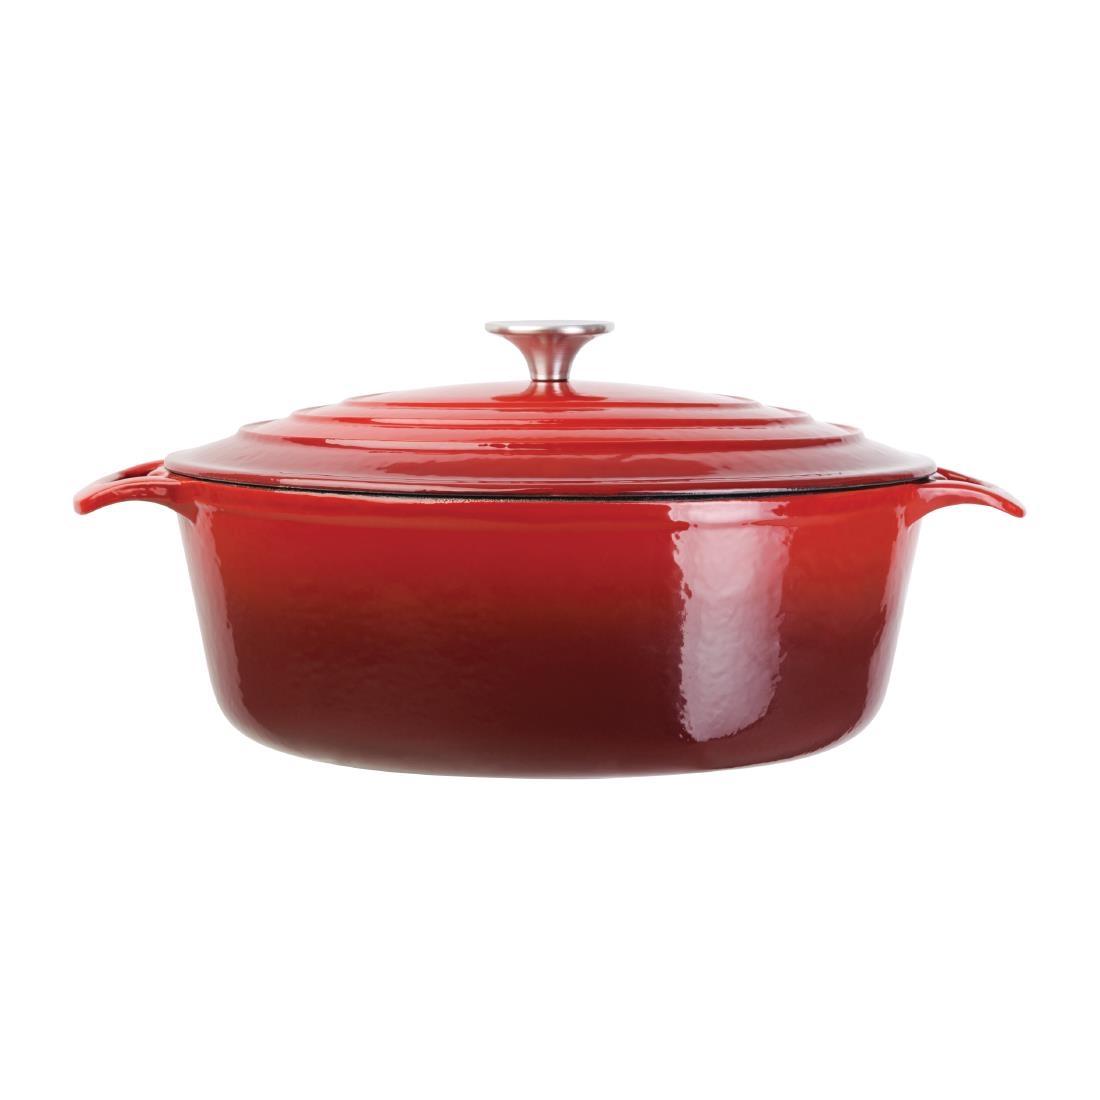 Vogue Red Oval Casserole Dish 6Ltr - GH314  - 2